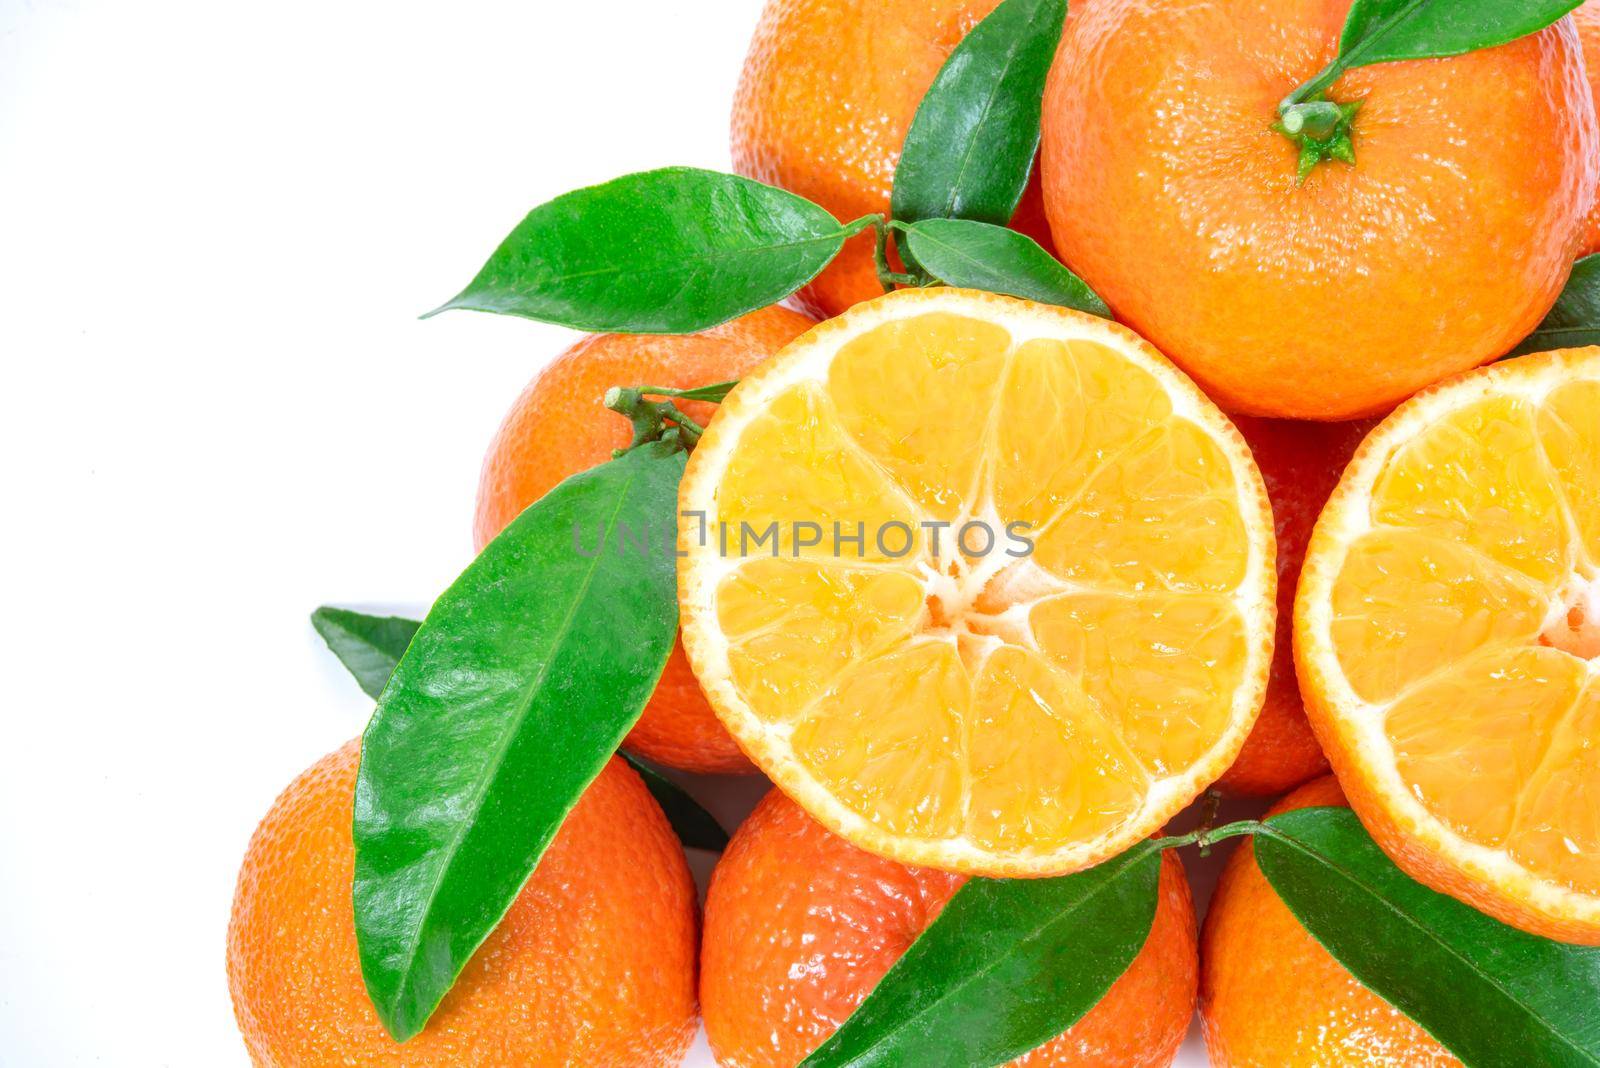 Tropical fruit composition - group of fresh oranges or tangerines  isolated on a white background